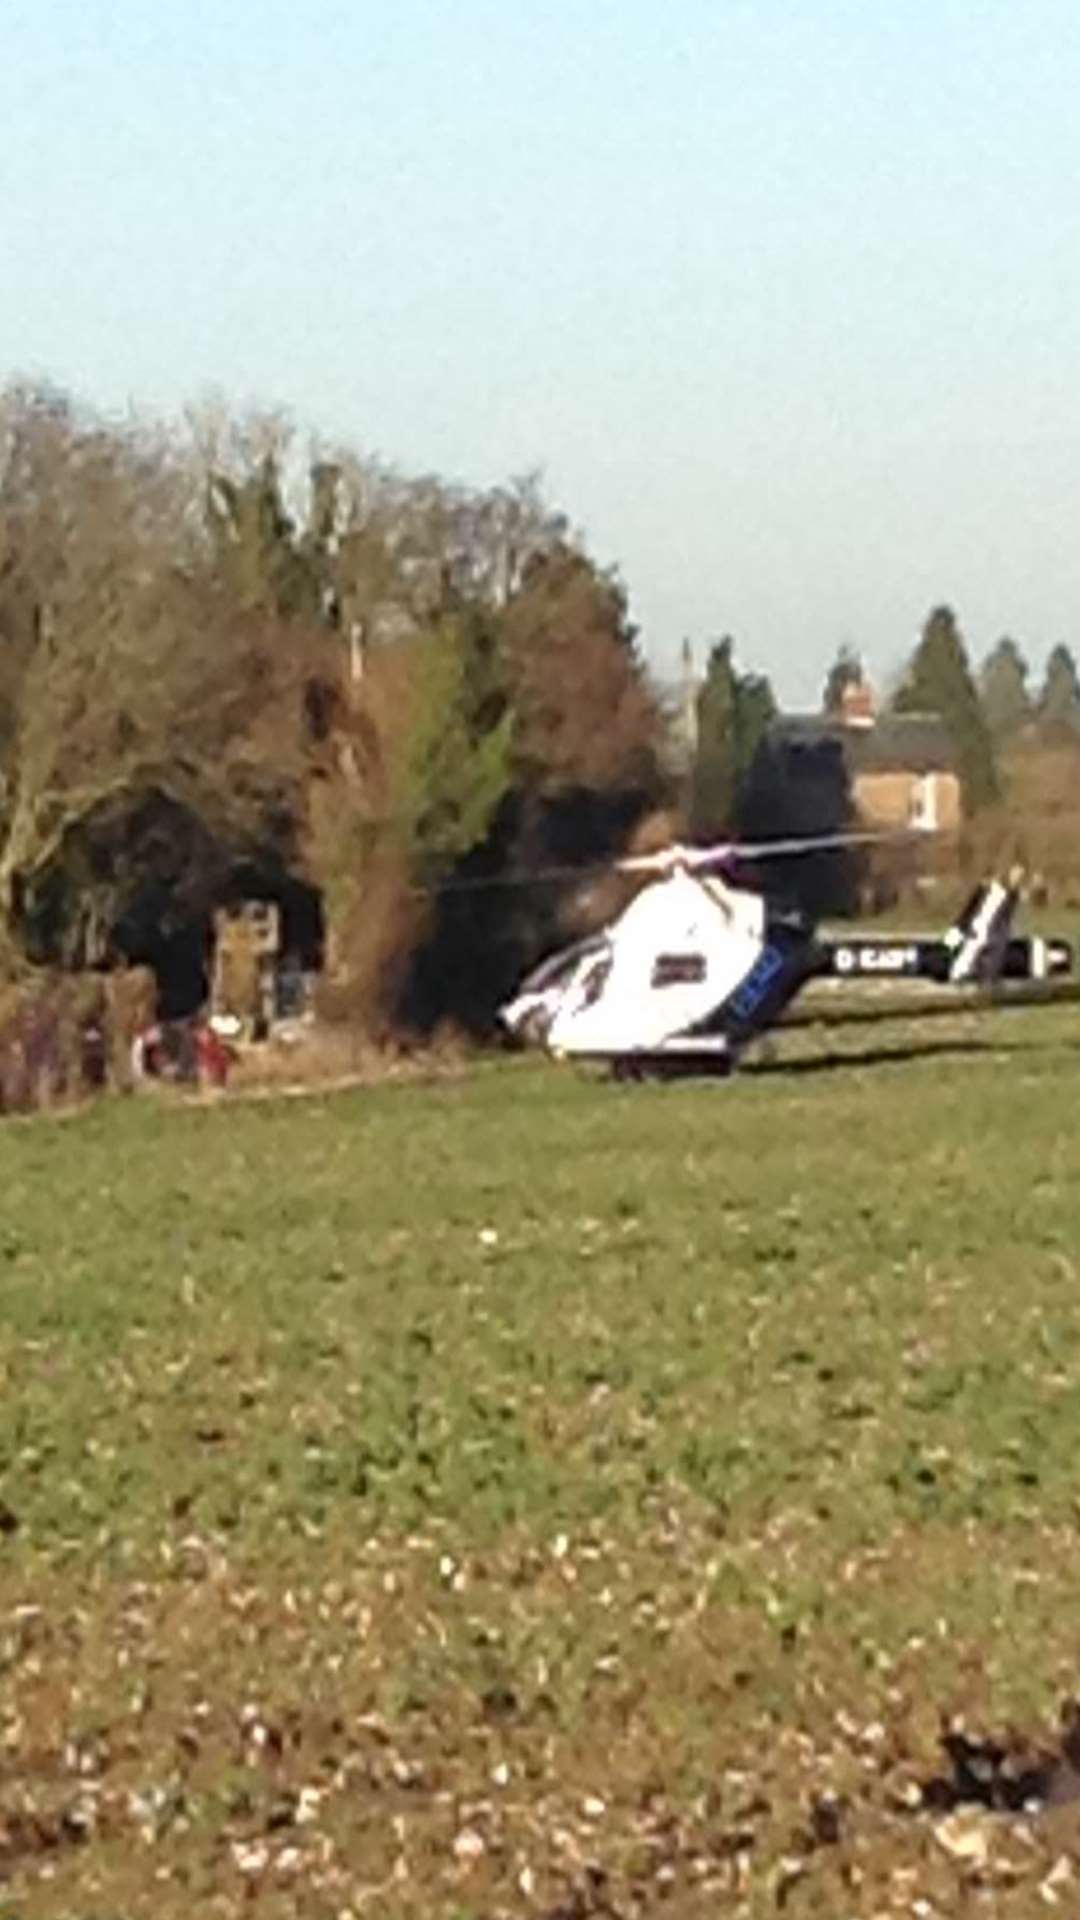 The air ambulance was called to the collision